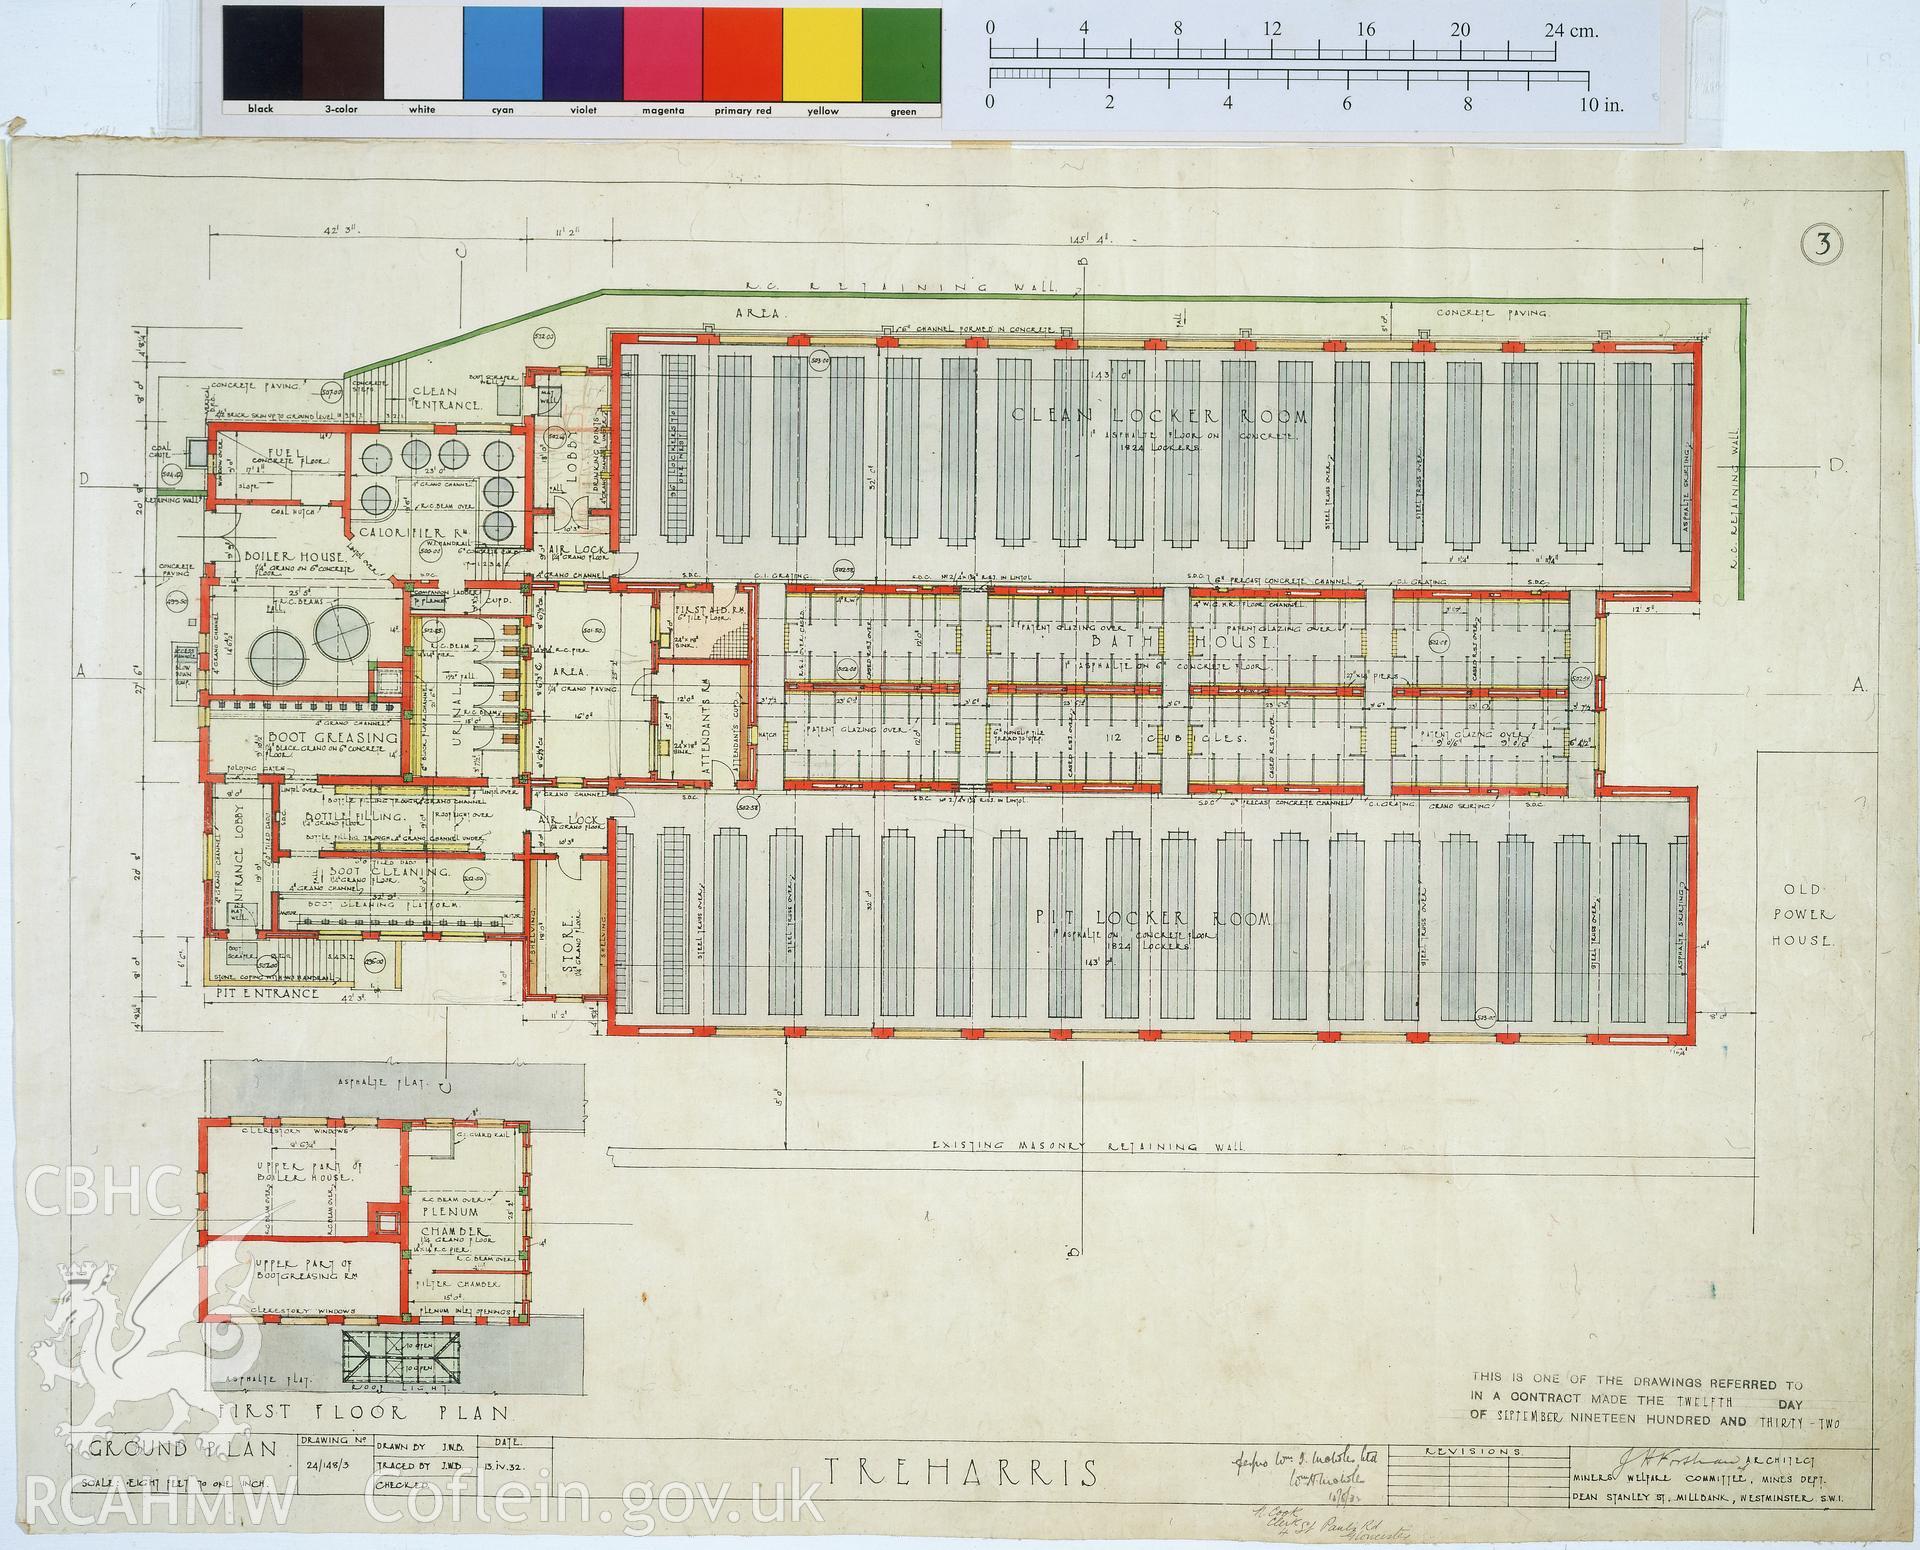 Colour transparency of a measured drawing showing first floor plan of the Bath House at  Ocean Deep Navigation Colliery , by J.H. Forshaw, Architect, 1932, from originals currently held by Gwent Record Office pending distribution to relevant county.